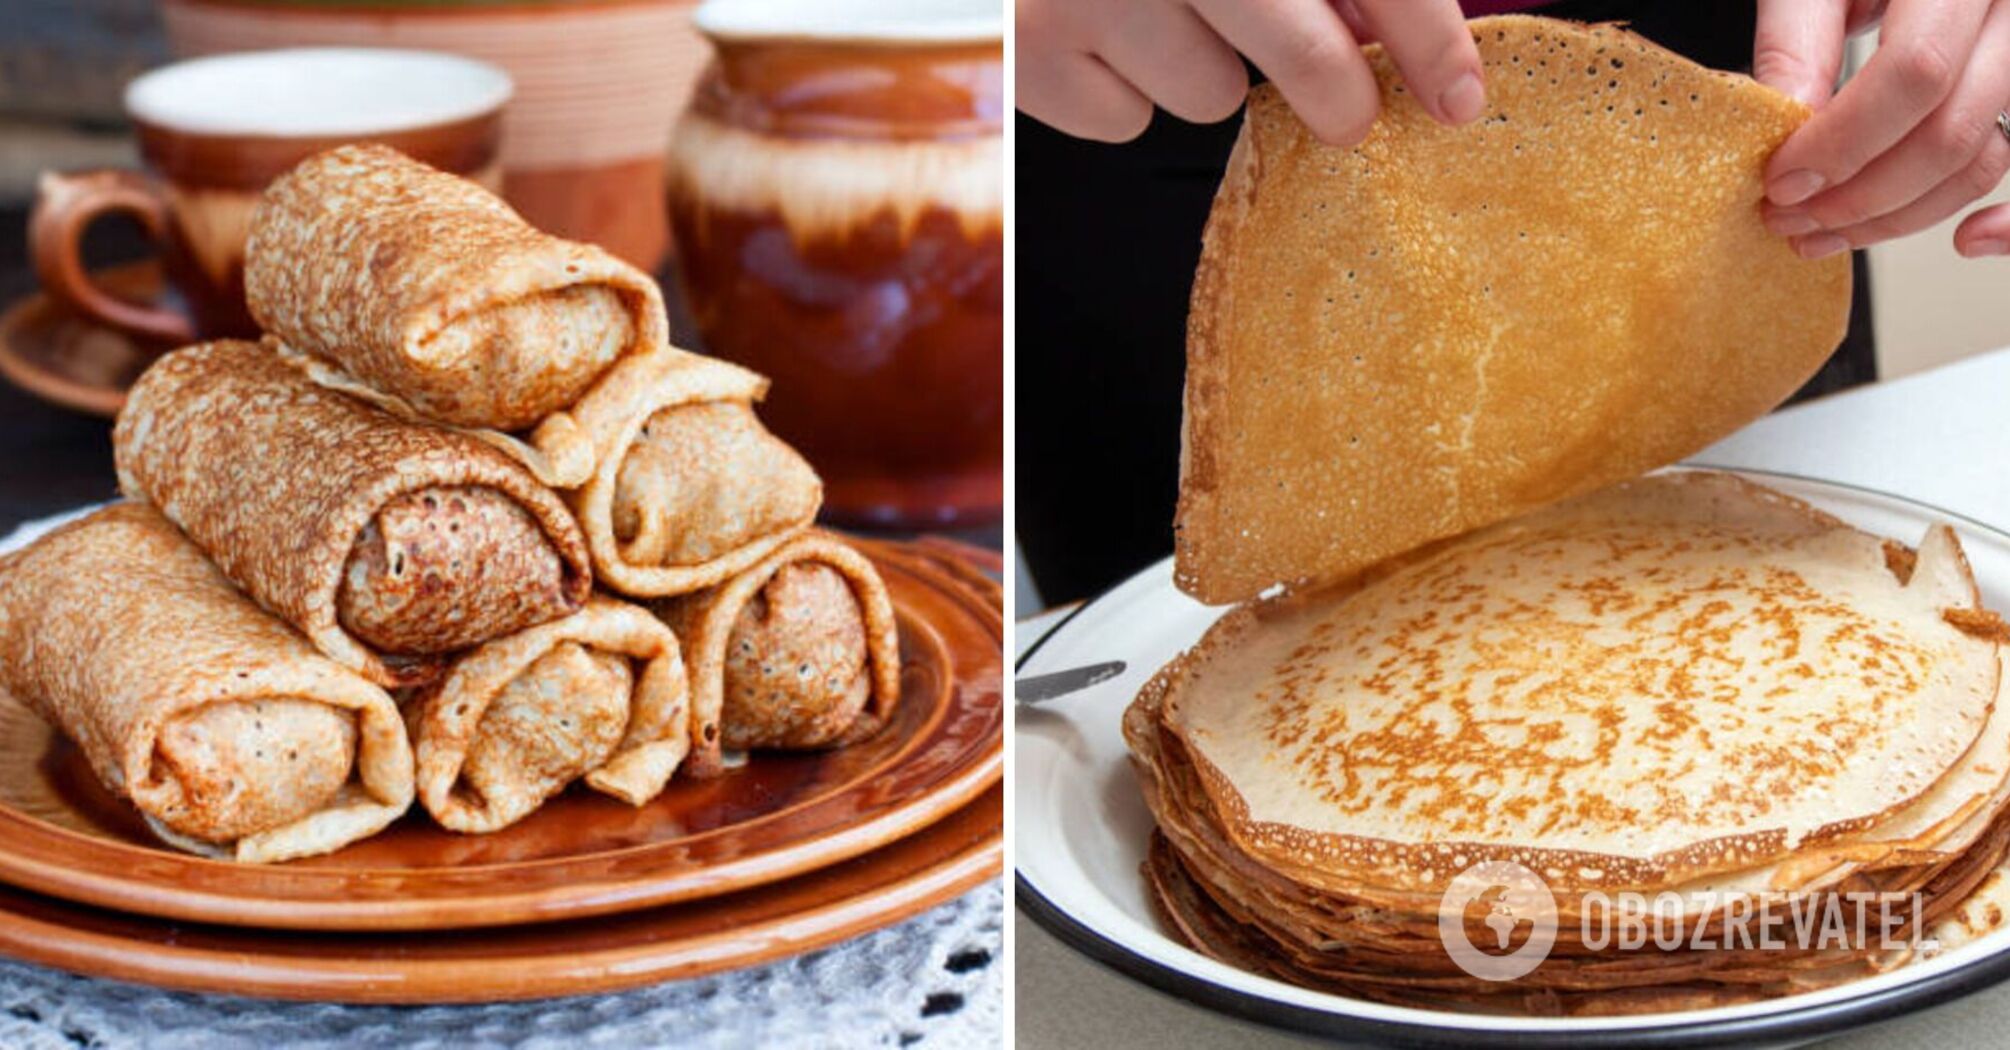 Crepes with salted fish filling according to Volodymyr Yaroslavskyi's recipe